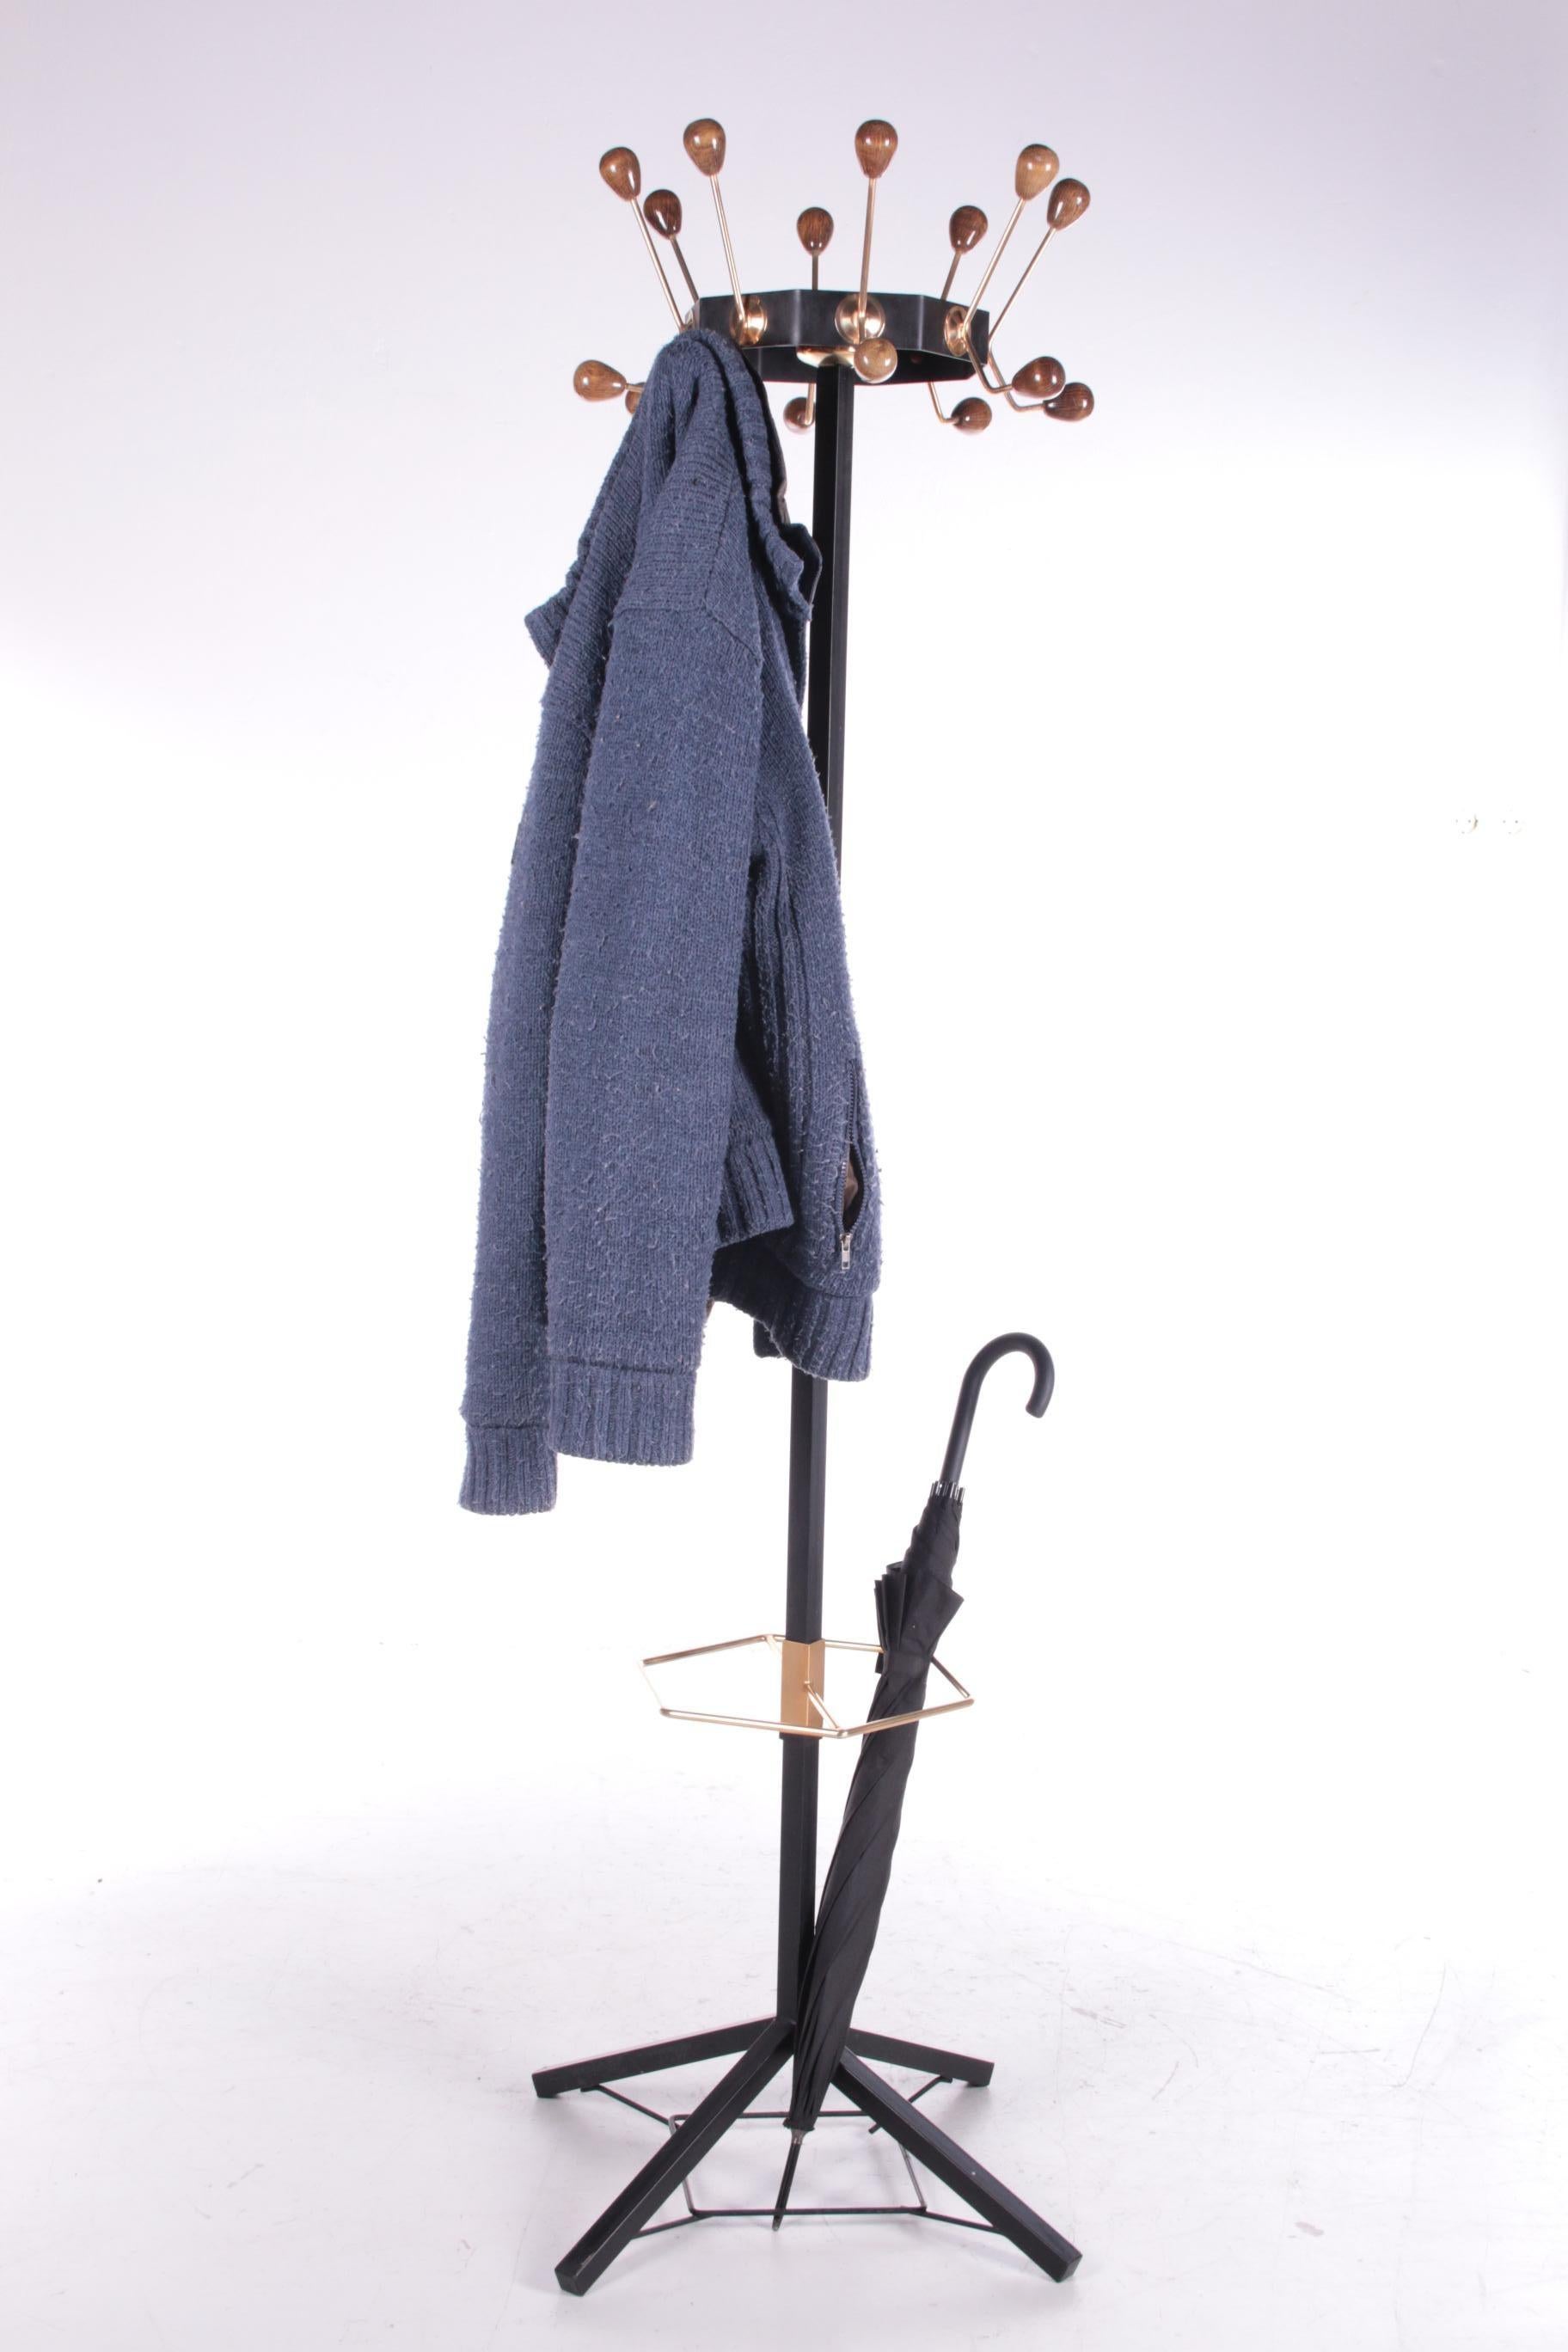 Vintage Metal freestanding coat rack from France


This is a beautiful black metal coat rack, with a rotating top.

The knobs are made of wood and lacquered beautifully.

At the bottom is a gold-coloured brass ring for the umbrellas or